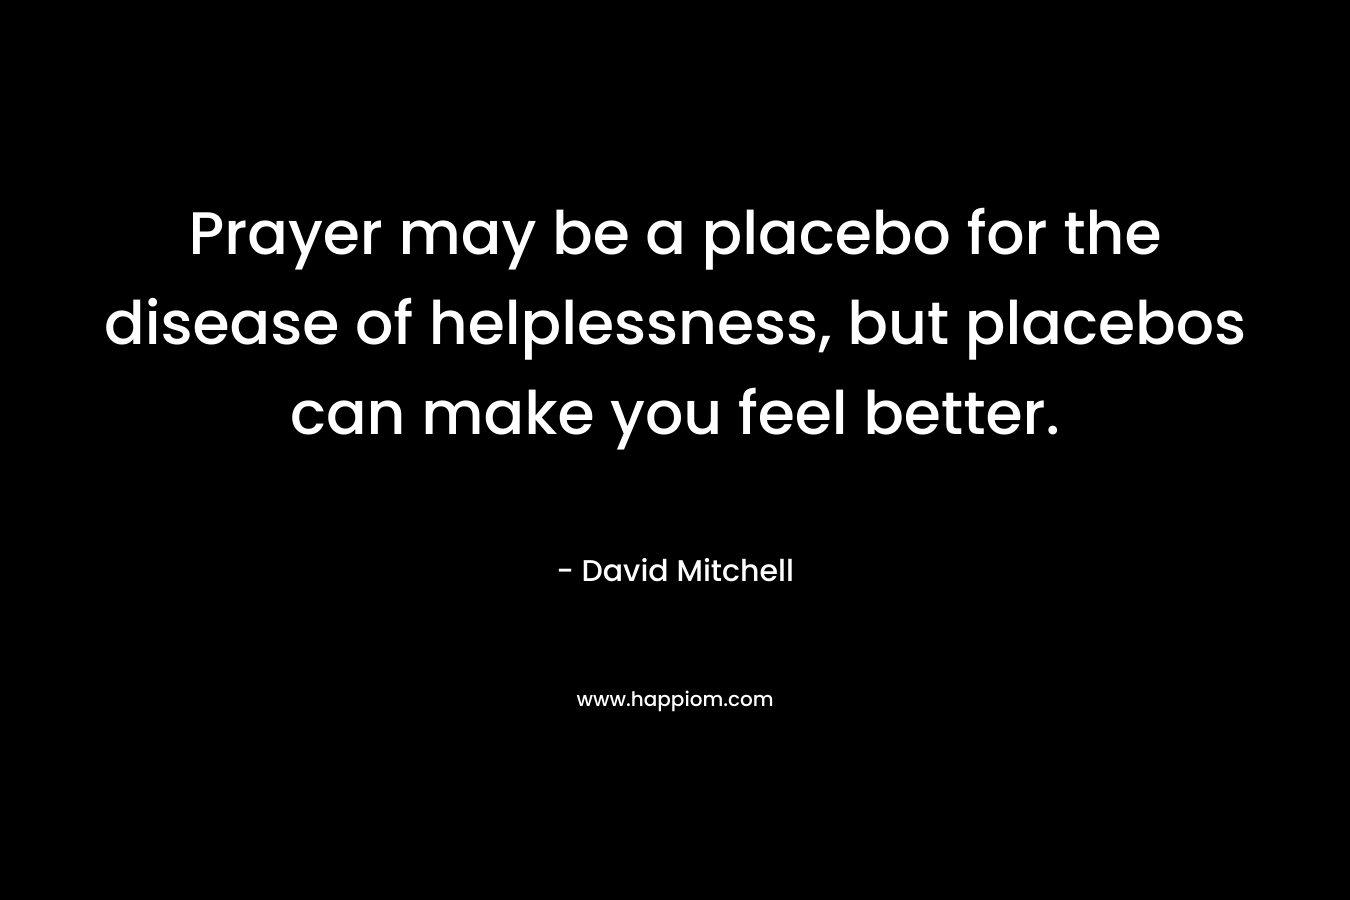 Prayer may be a placebo for the disease of helplessness, but placebos can make you feel better. – David Mitchell